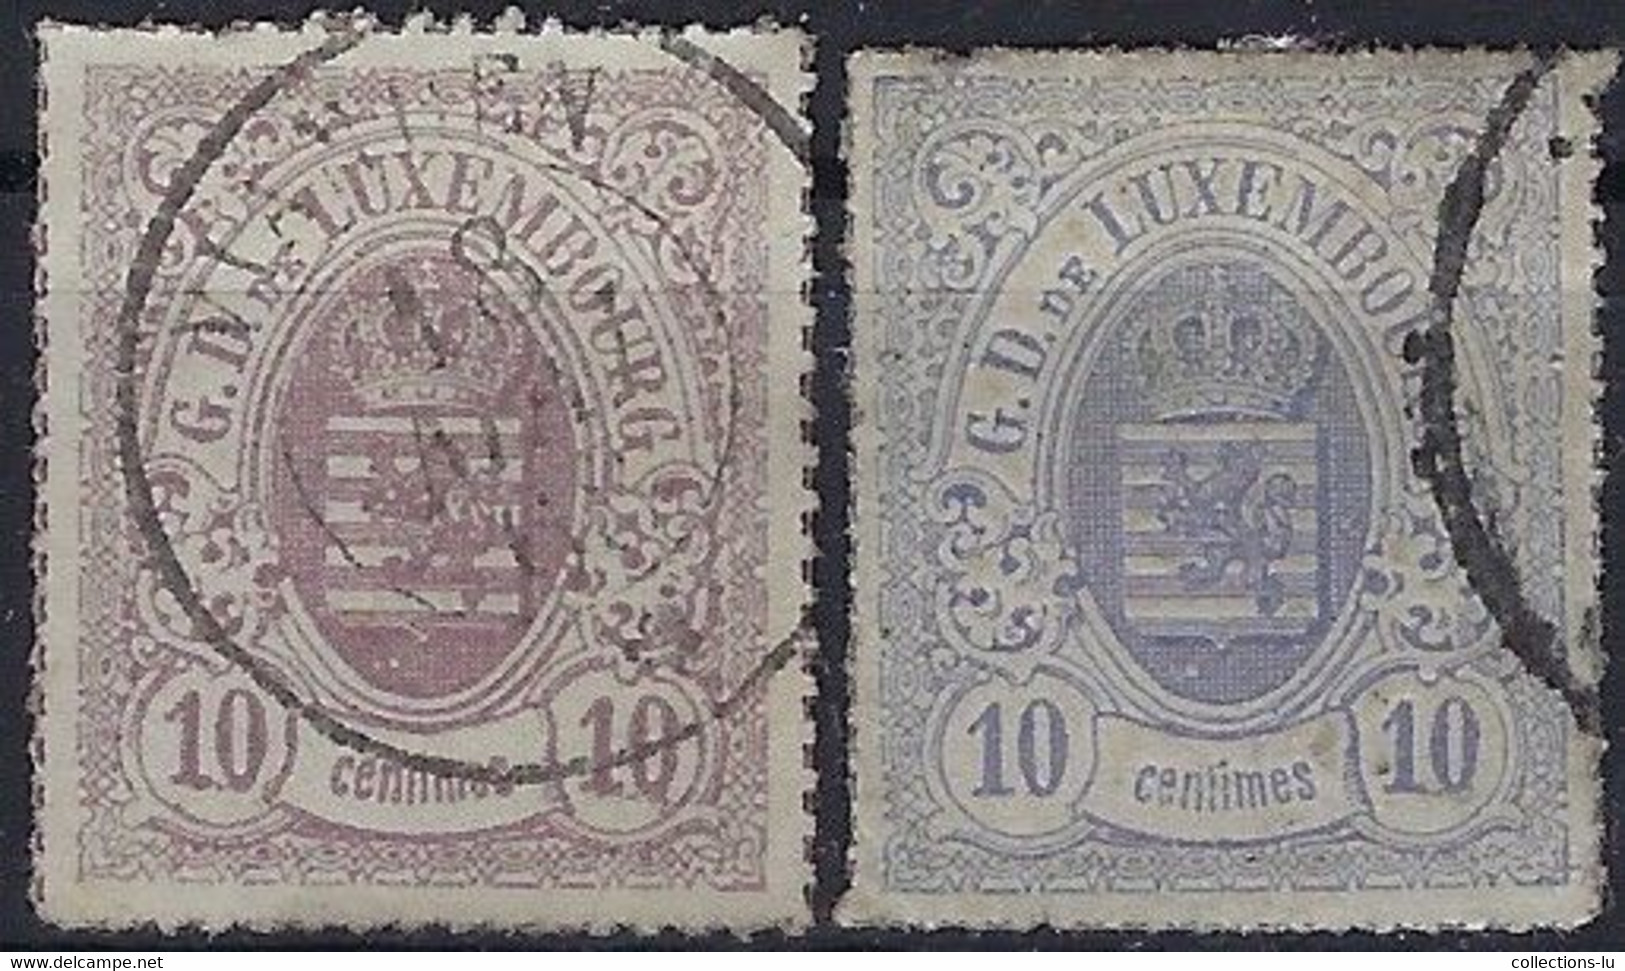 Luxembourg - Luxemburg - Timbres - 1865   2x10C.  °   Michel 17a , 19c   VC. 10,- - 1859-1880 Armarios